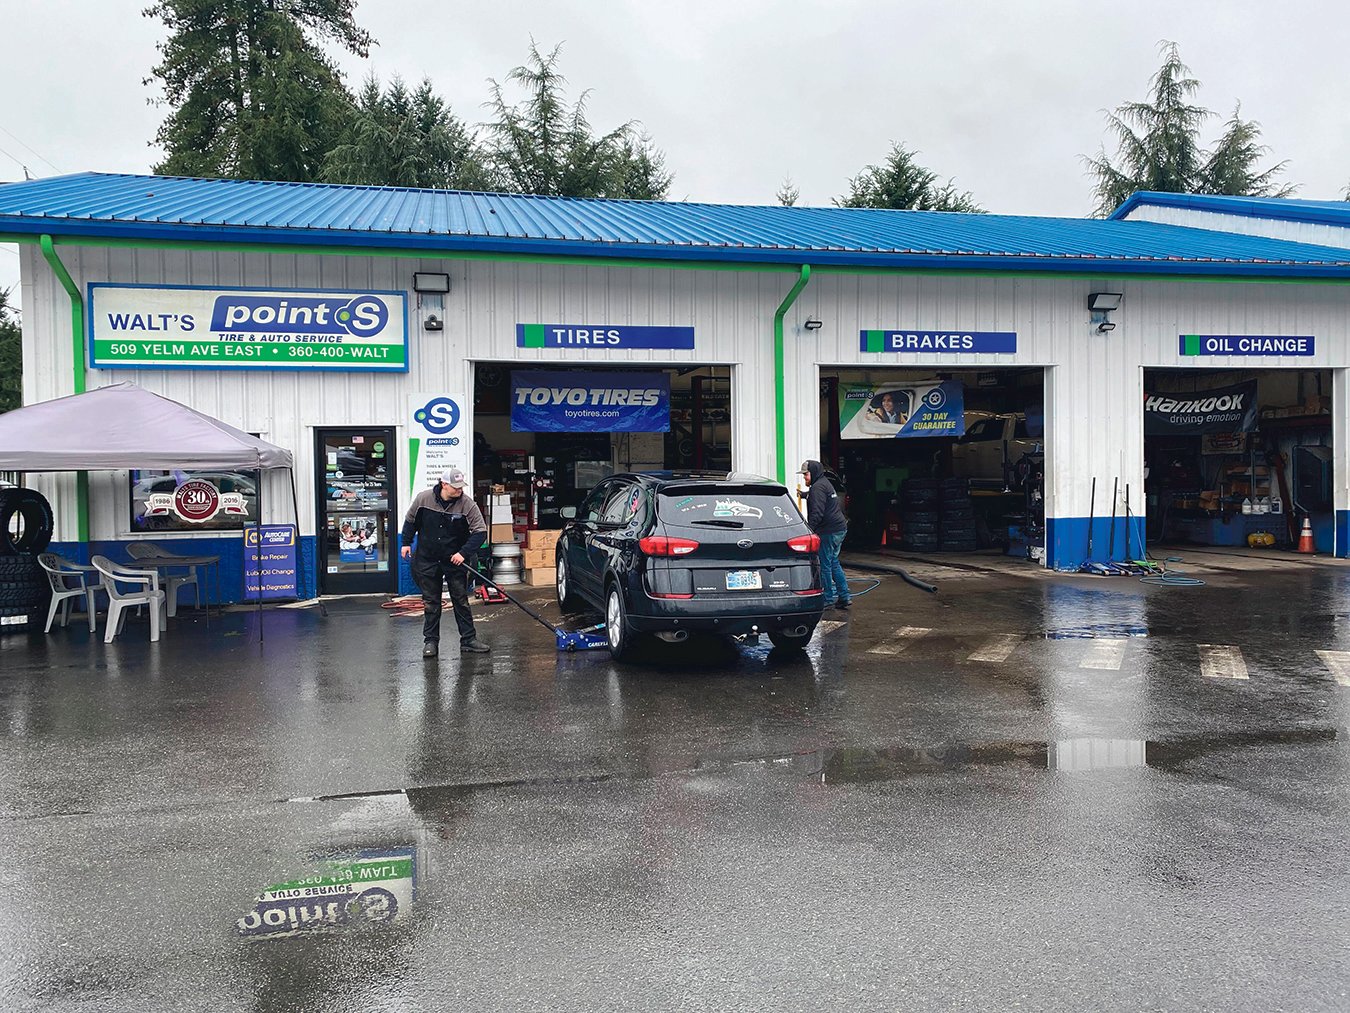 Walt’s Point S Tires on Yelm Avenue is pictured.